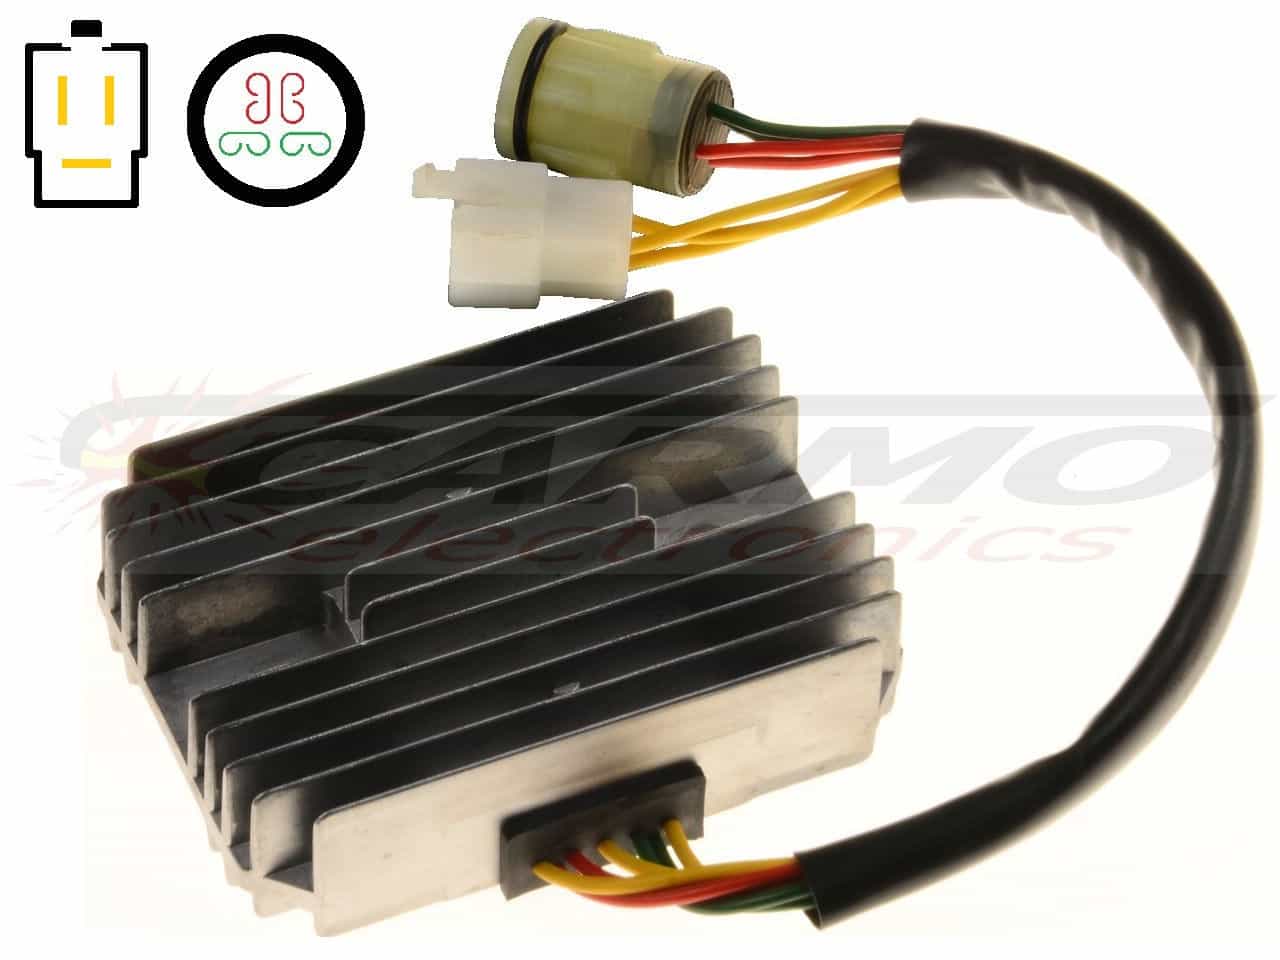 CARR831 Honda XRV750 Africa Twin MOSFET Voltage regulator rectifier - Click Image to Close